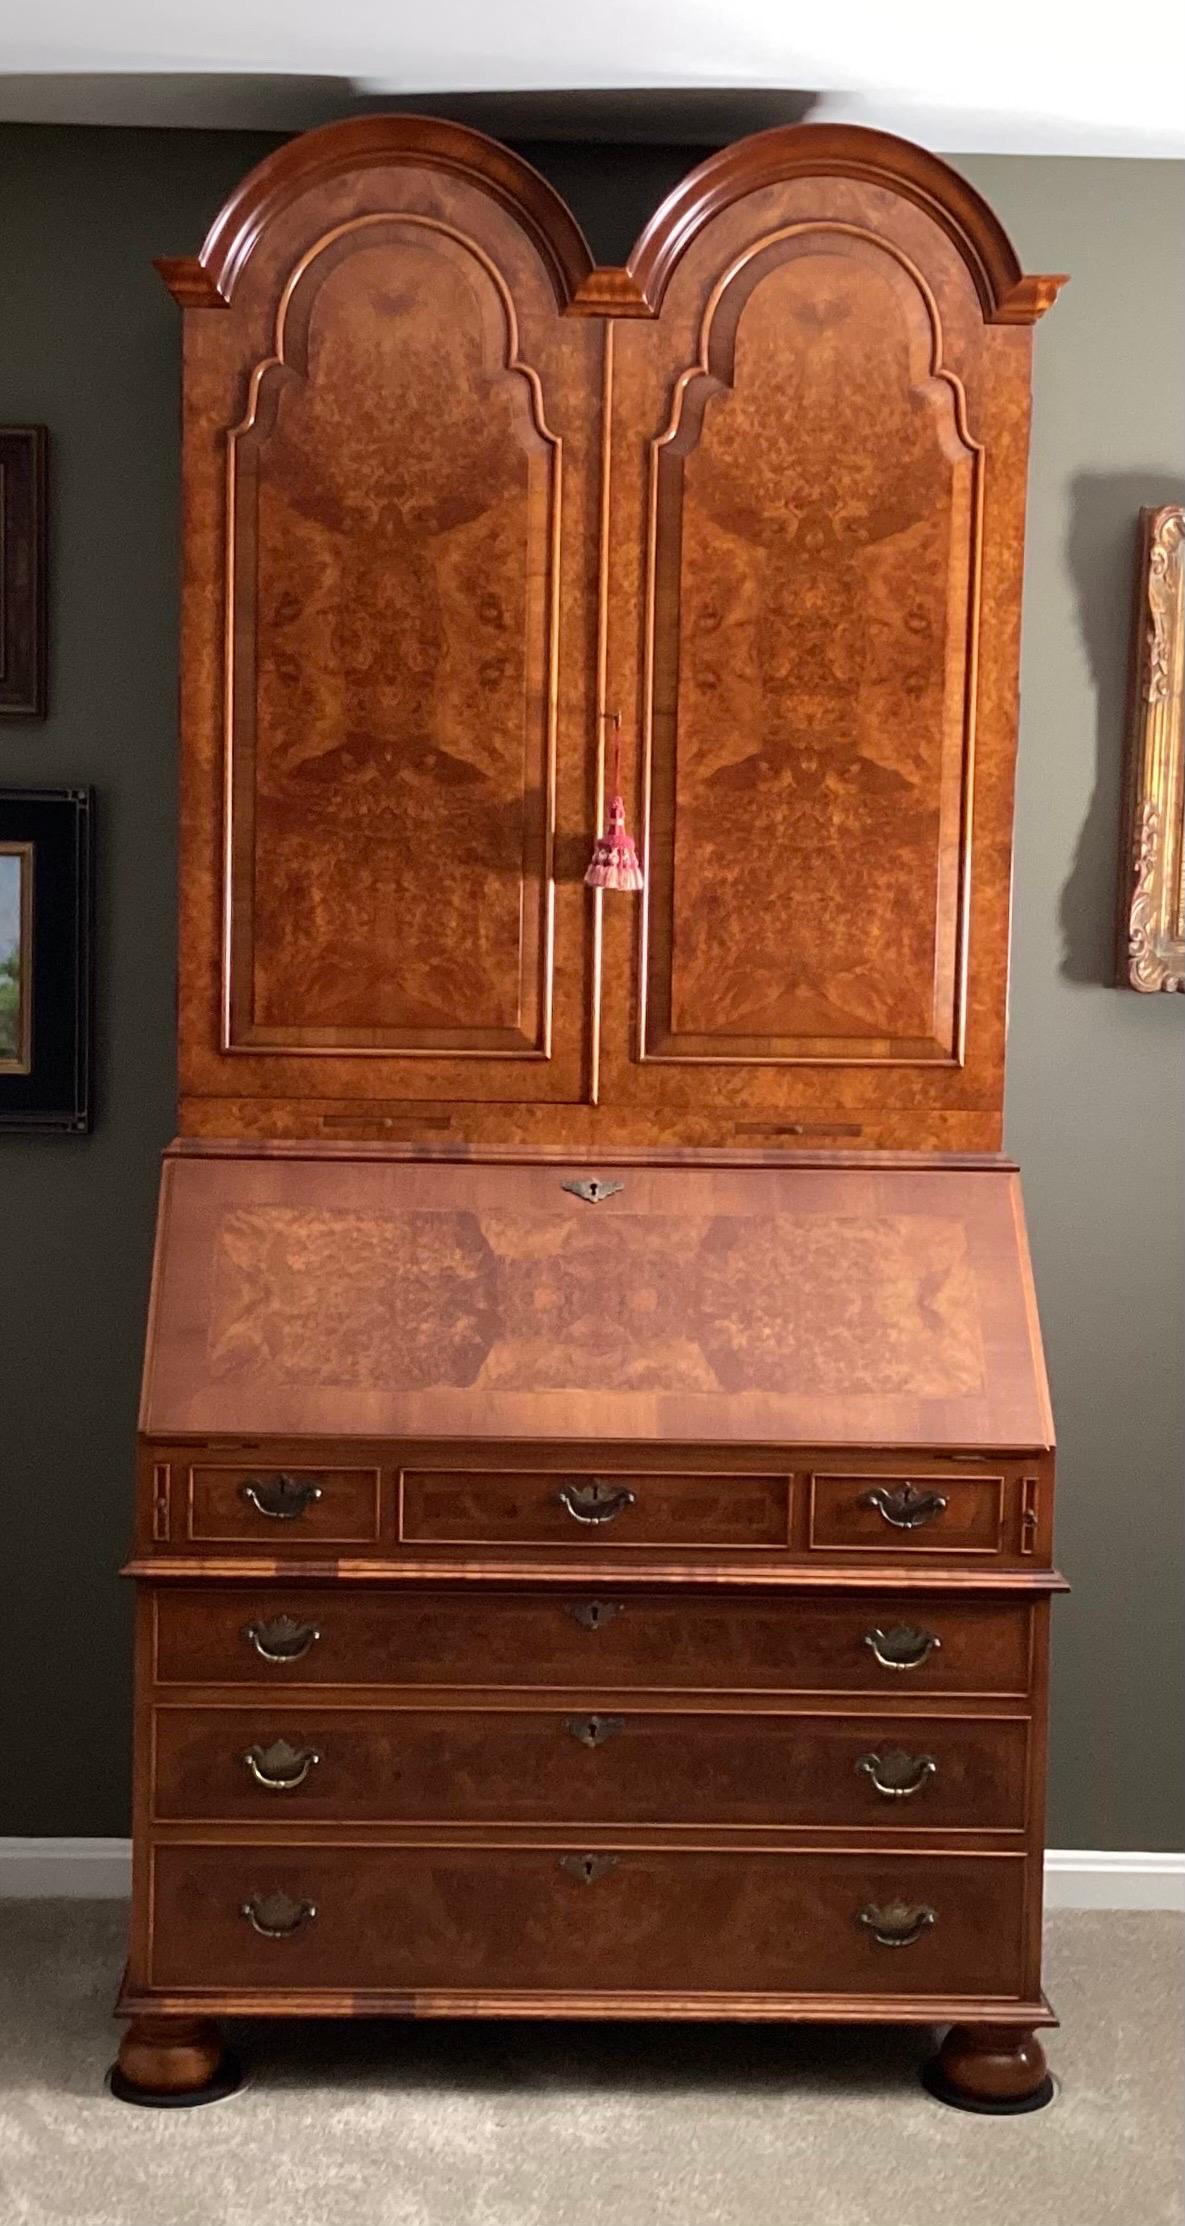 A beautifully detailed and well appointed Georgian style secretary desk, made in England.  The dovetailed drawers with brass hardware with a leather fall front section above the drawers, the top with highly figurative burl blind doors.  The desk is